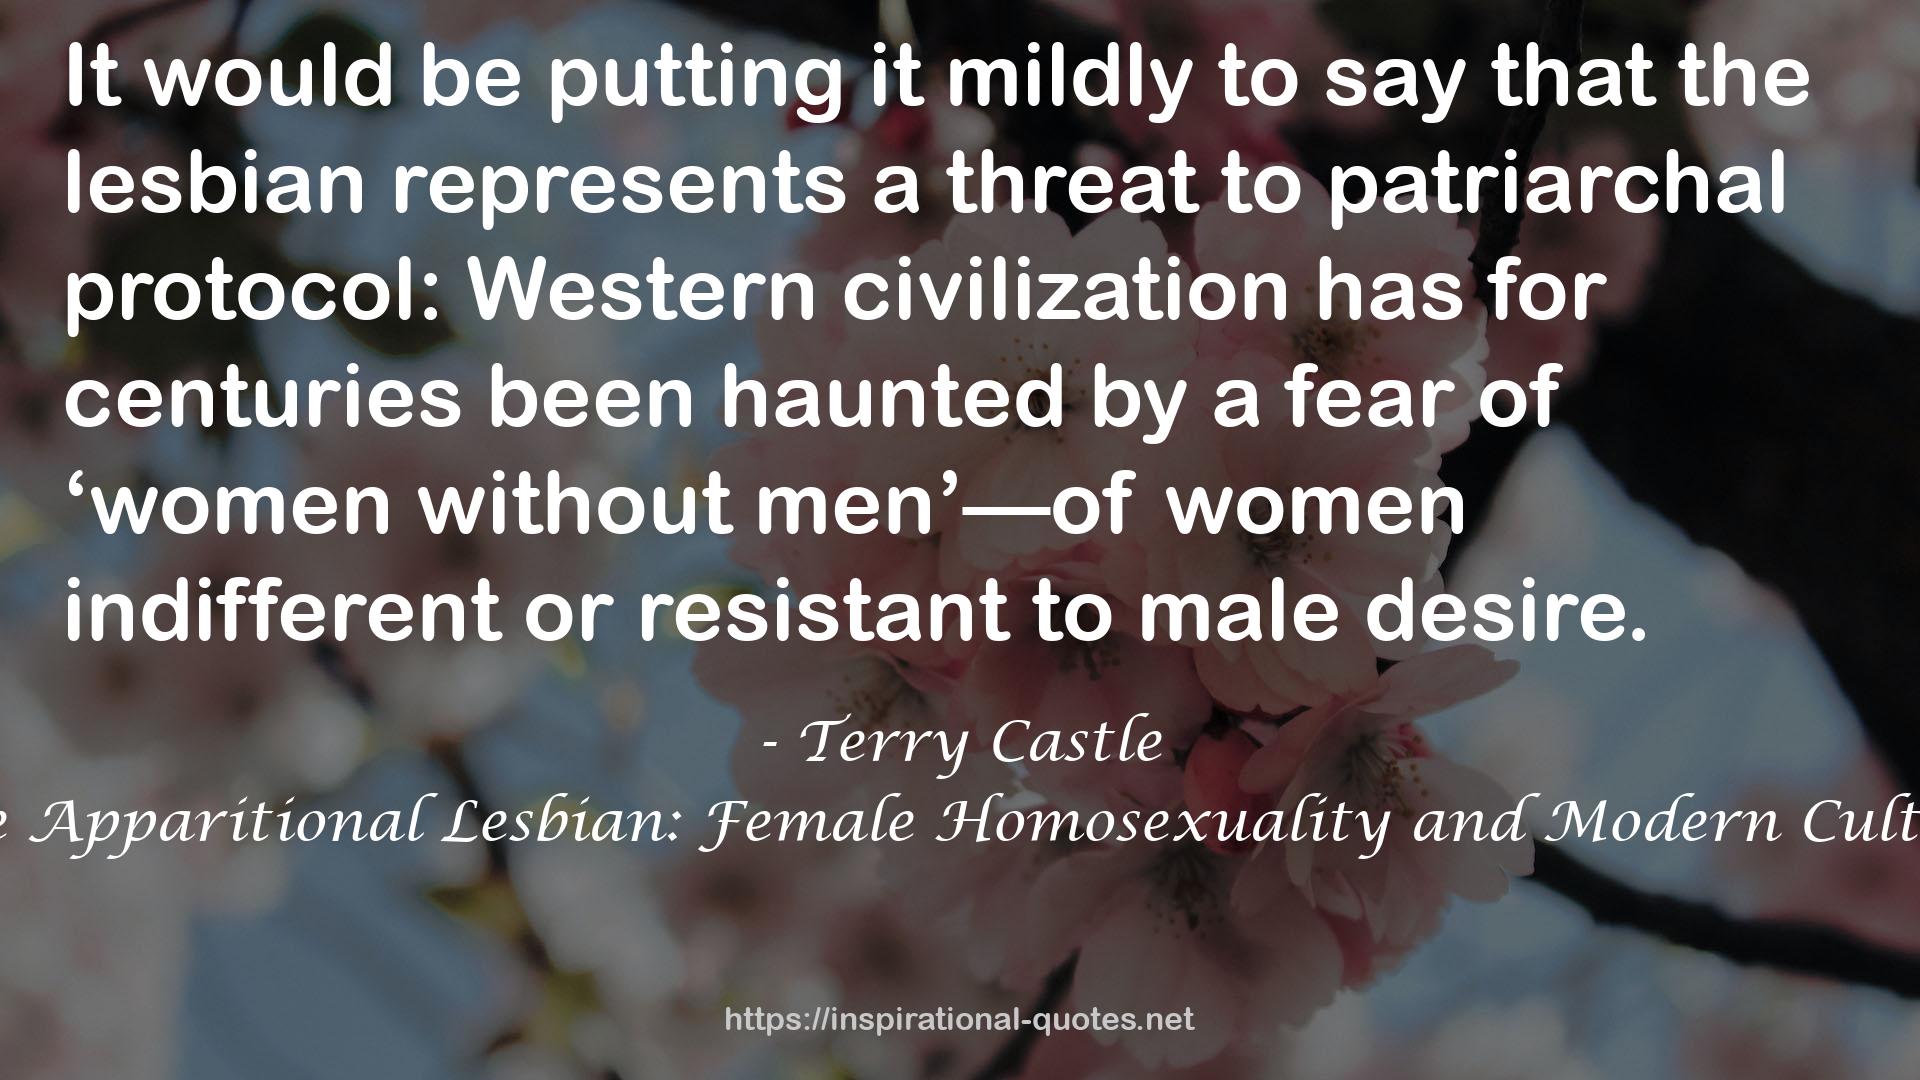 The Apparitional Lesbian: Female Homosexuality and Modern Culture QUOTES